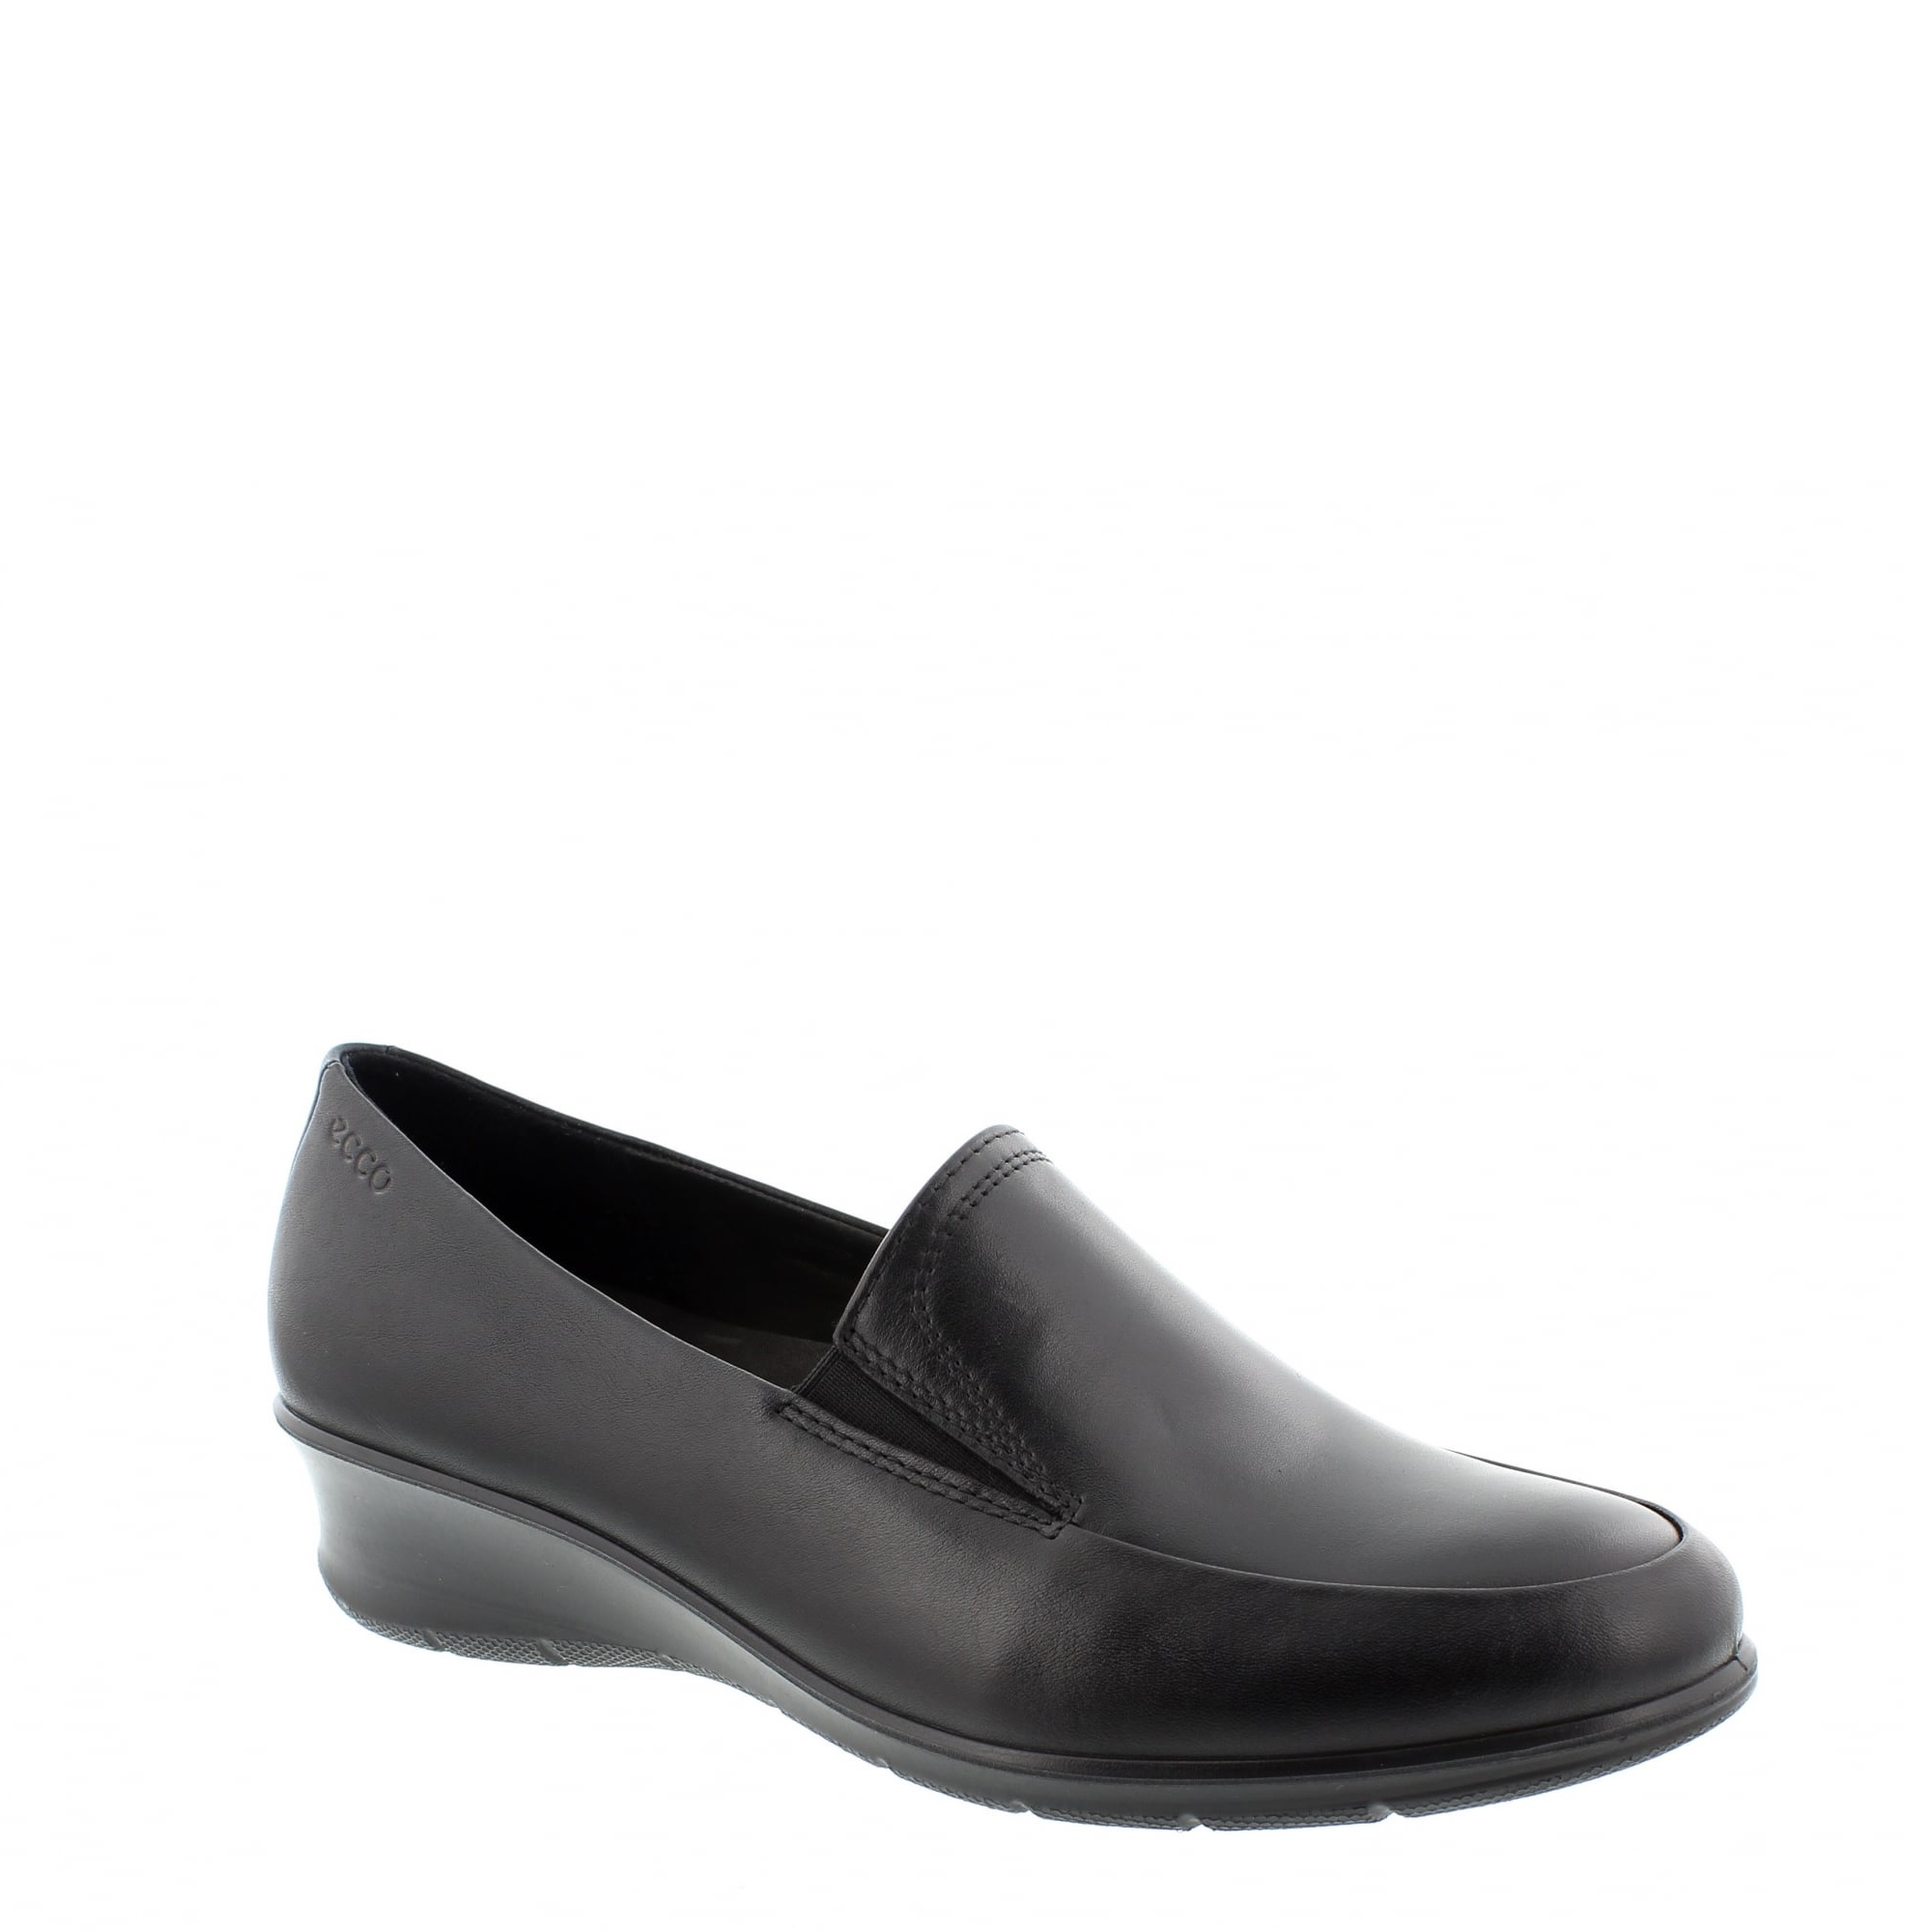 Ecco Ladies Moccasin Black Leather Slip-On Shoe - County Shoes Dorchester